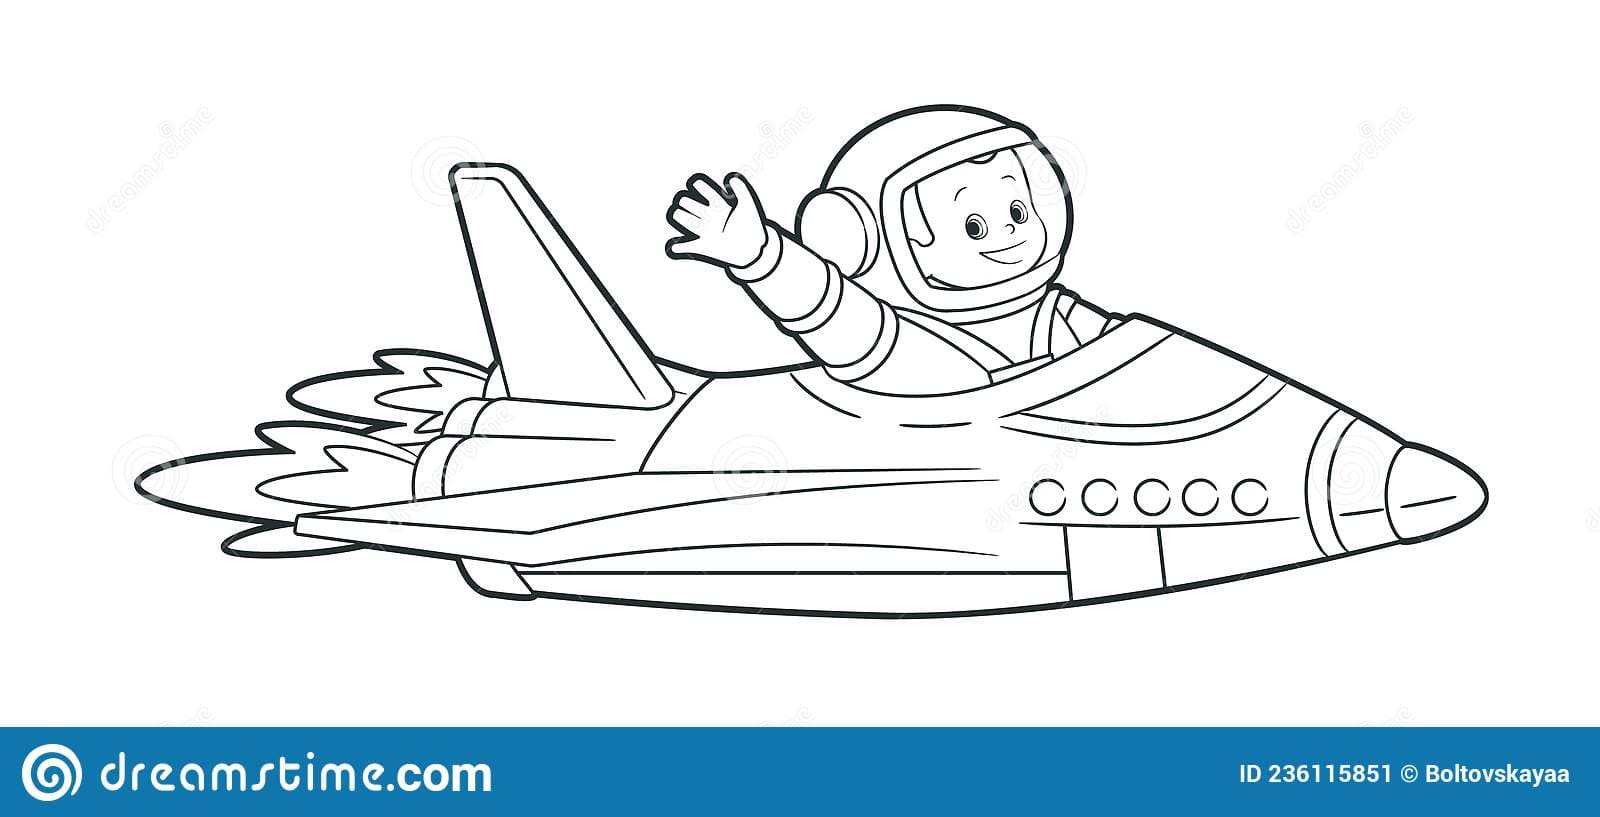 An Astronaut flies on a shuttle among the planets and waves his hand in greeting Coloring Page